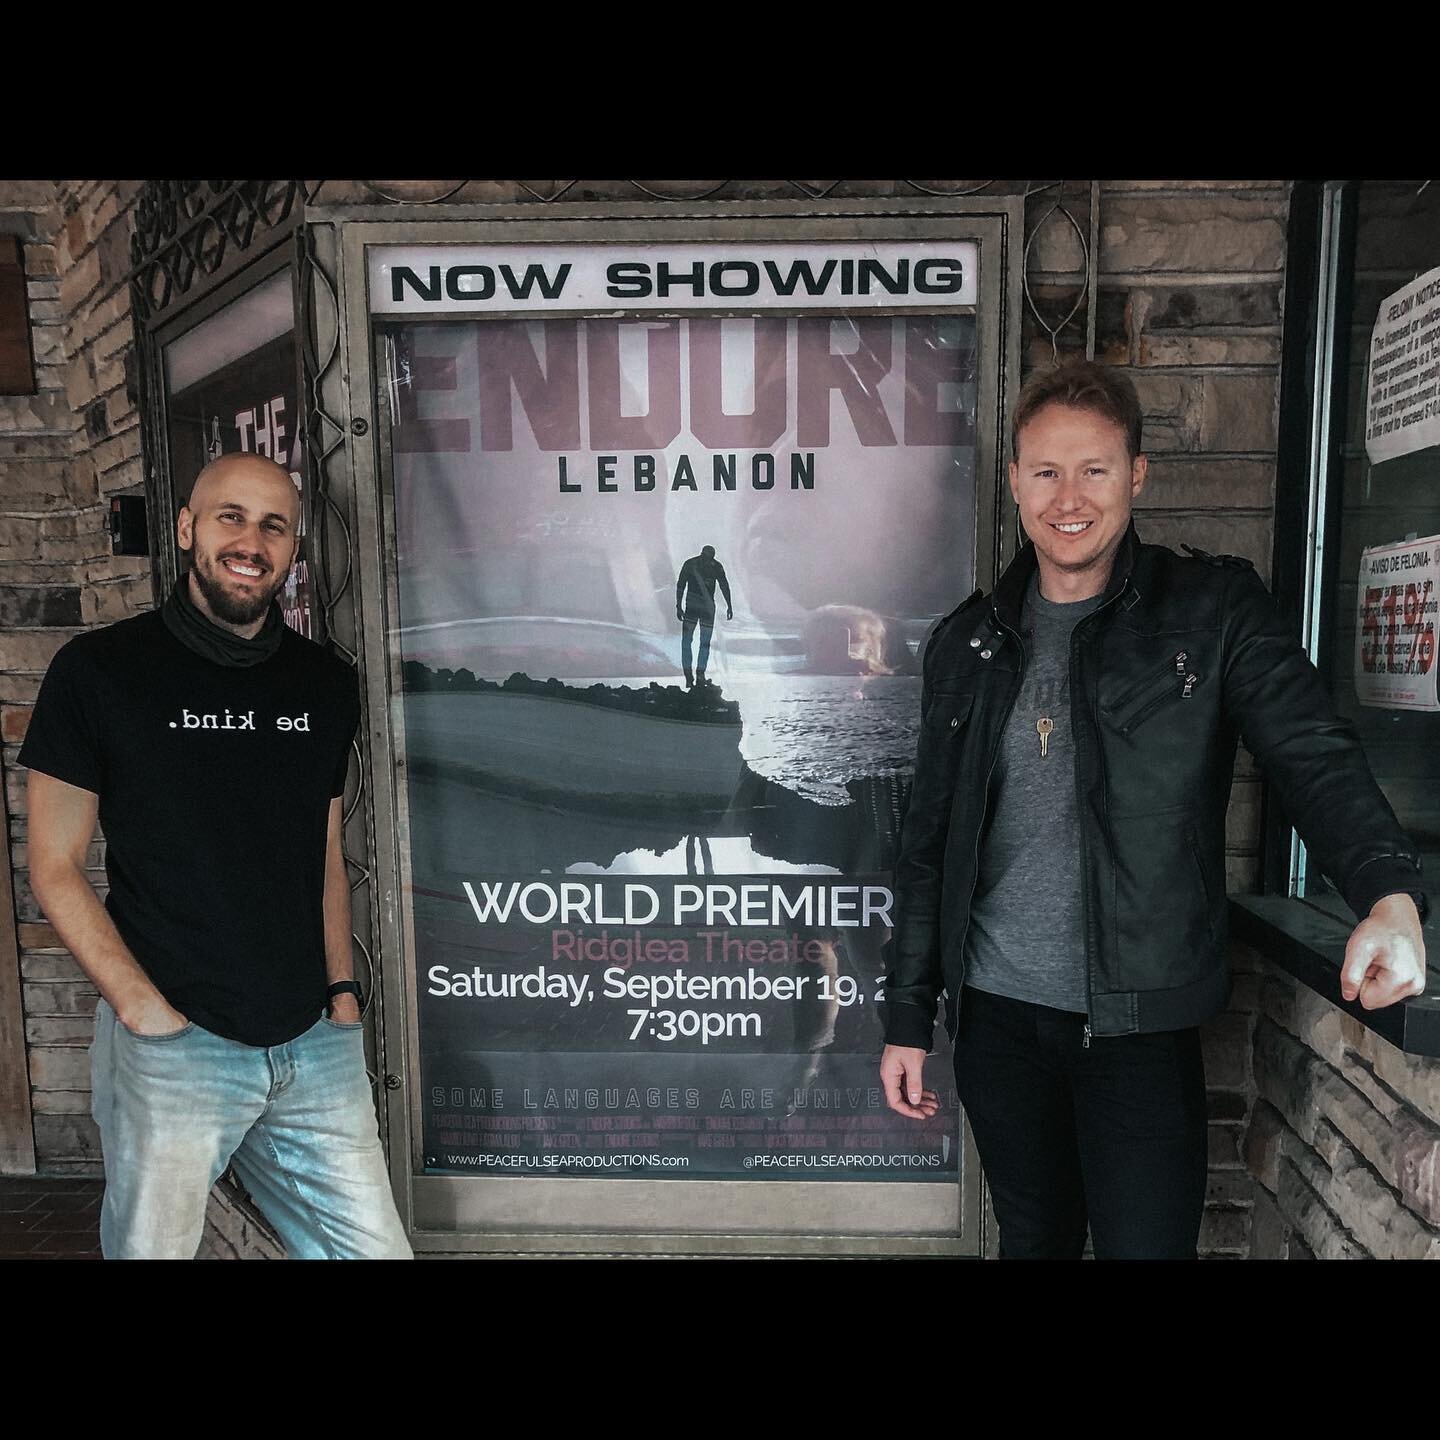 TODAY IS RELEASE DAY!  Endure: Lebanon is out on Amazon Prime, and available everywhere!
_
A film by @thejakegreen of @peacefulseaproductions - the film follows the story of my trip to Lebanon to write and record and album with refugees from Syria an